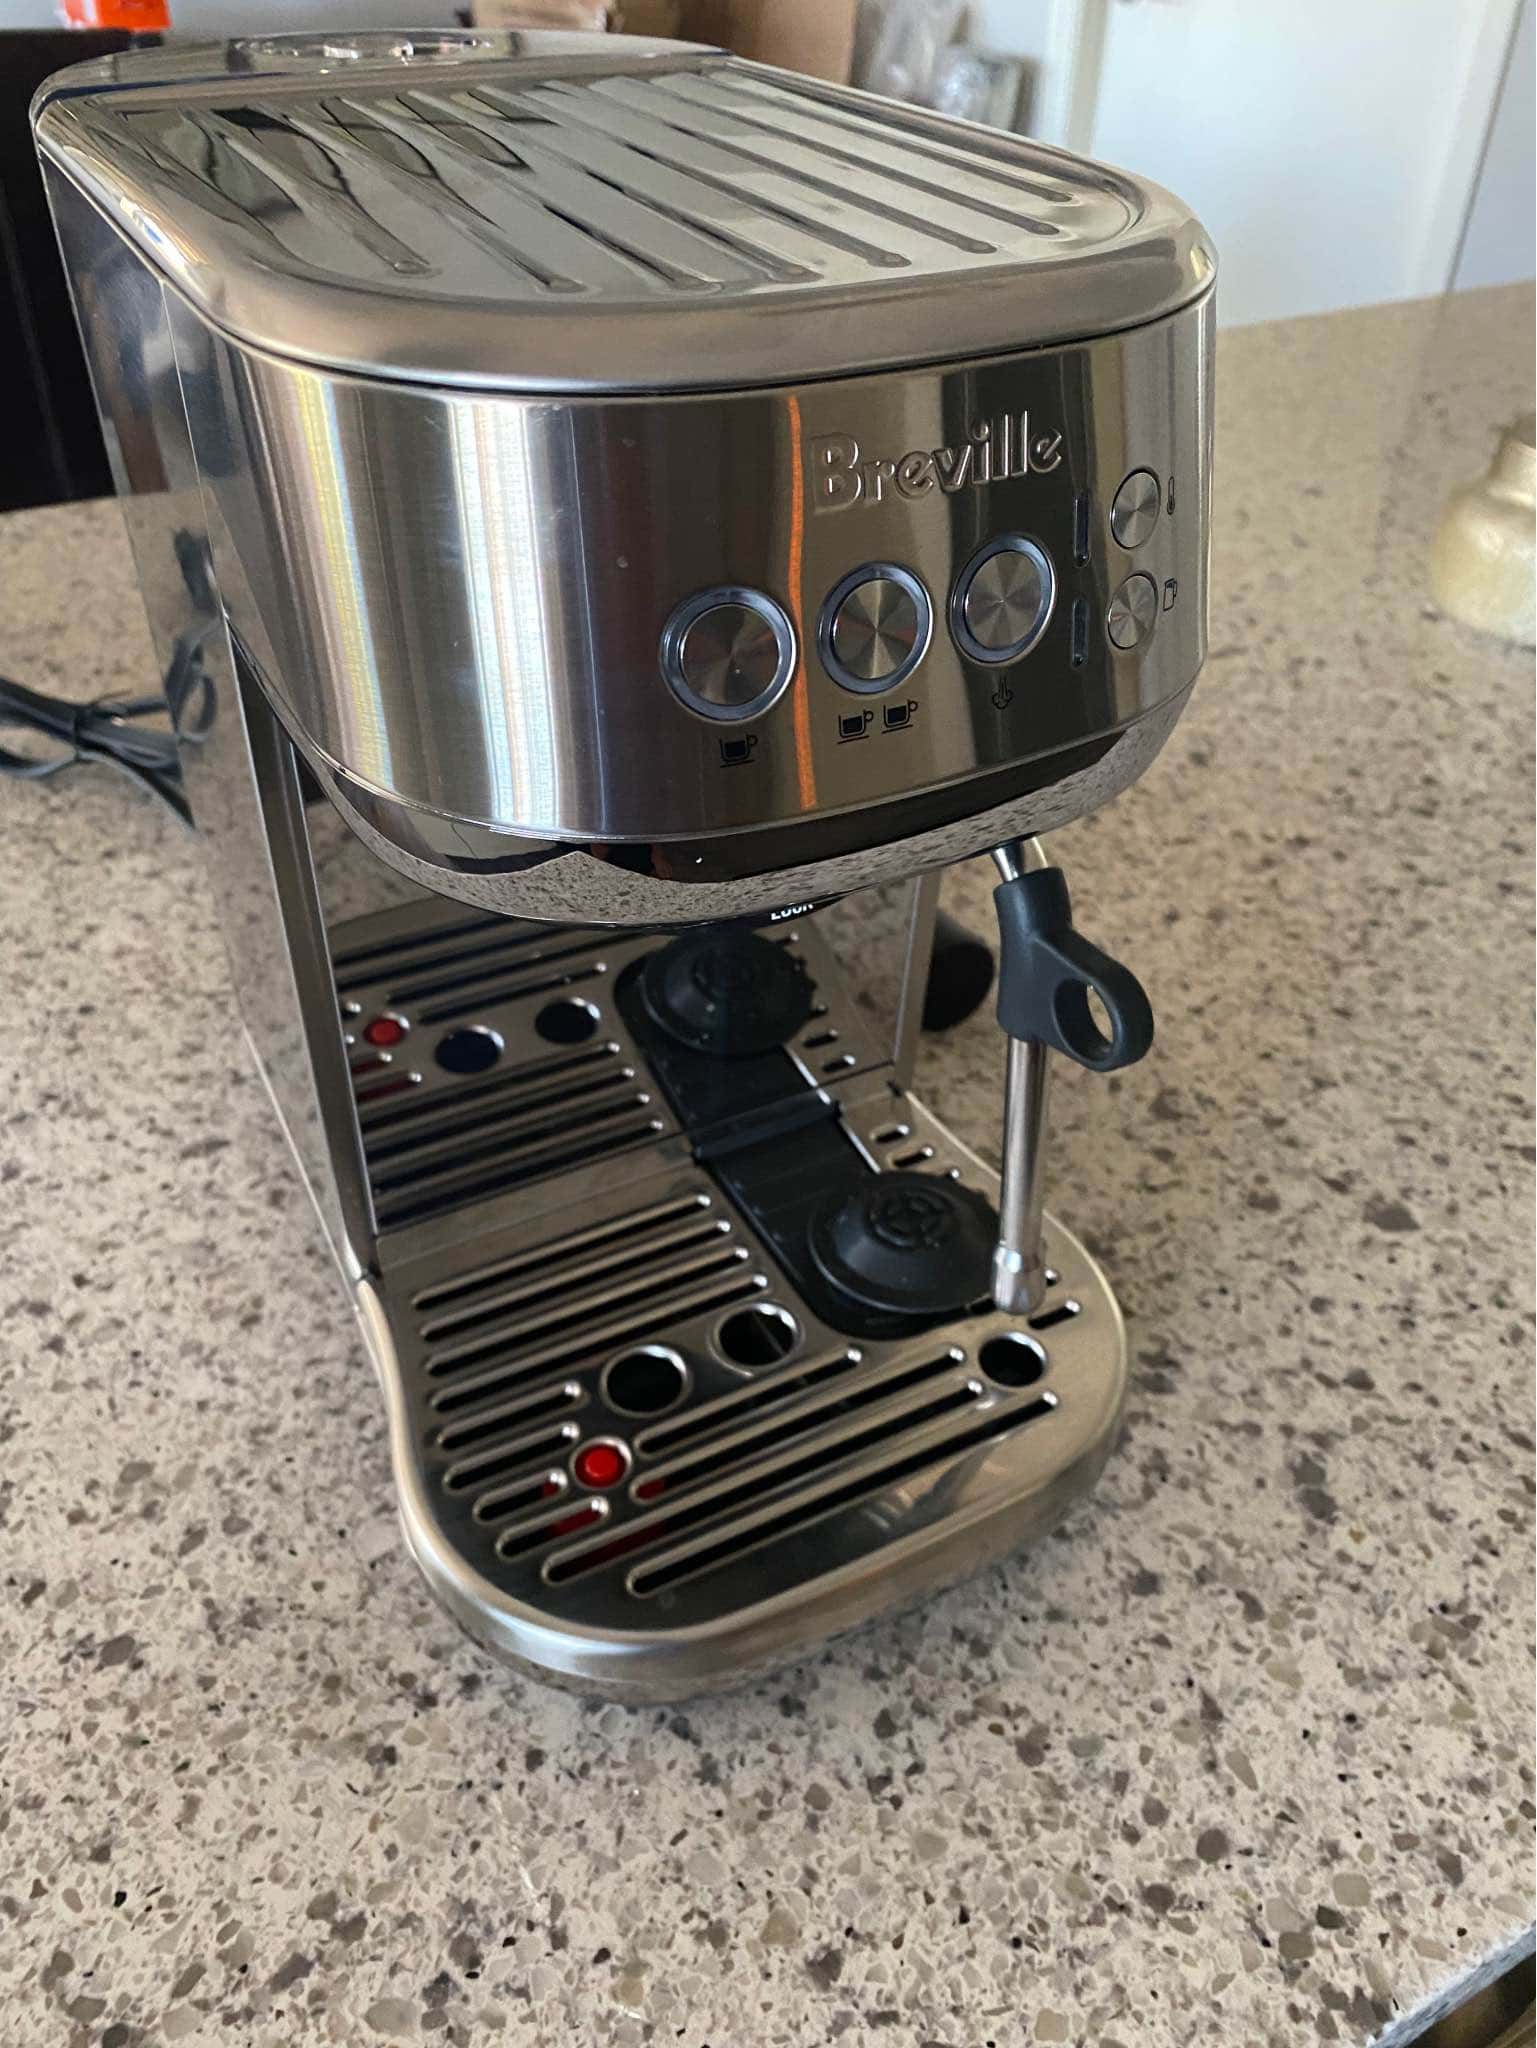 Breville Bambino Plus comes with an auto-purge feature